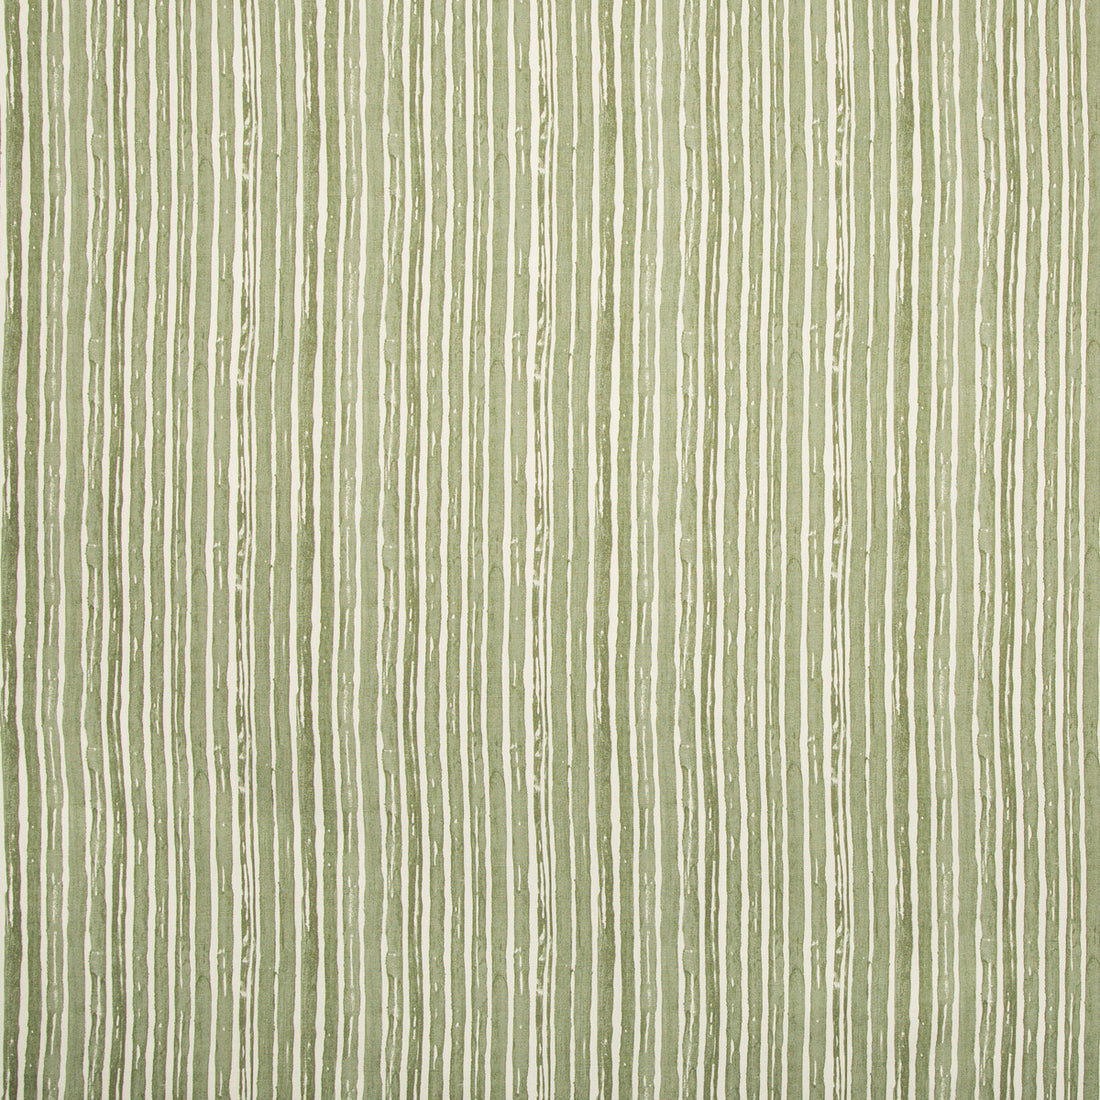 Benson Stripe fabric in pine color - pattern 2019151.30.0 - by Lee Jofa in the Carrier And Company collection